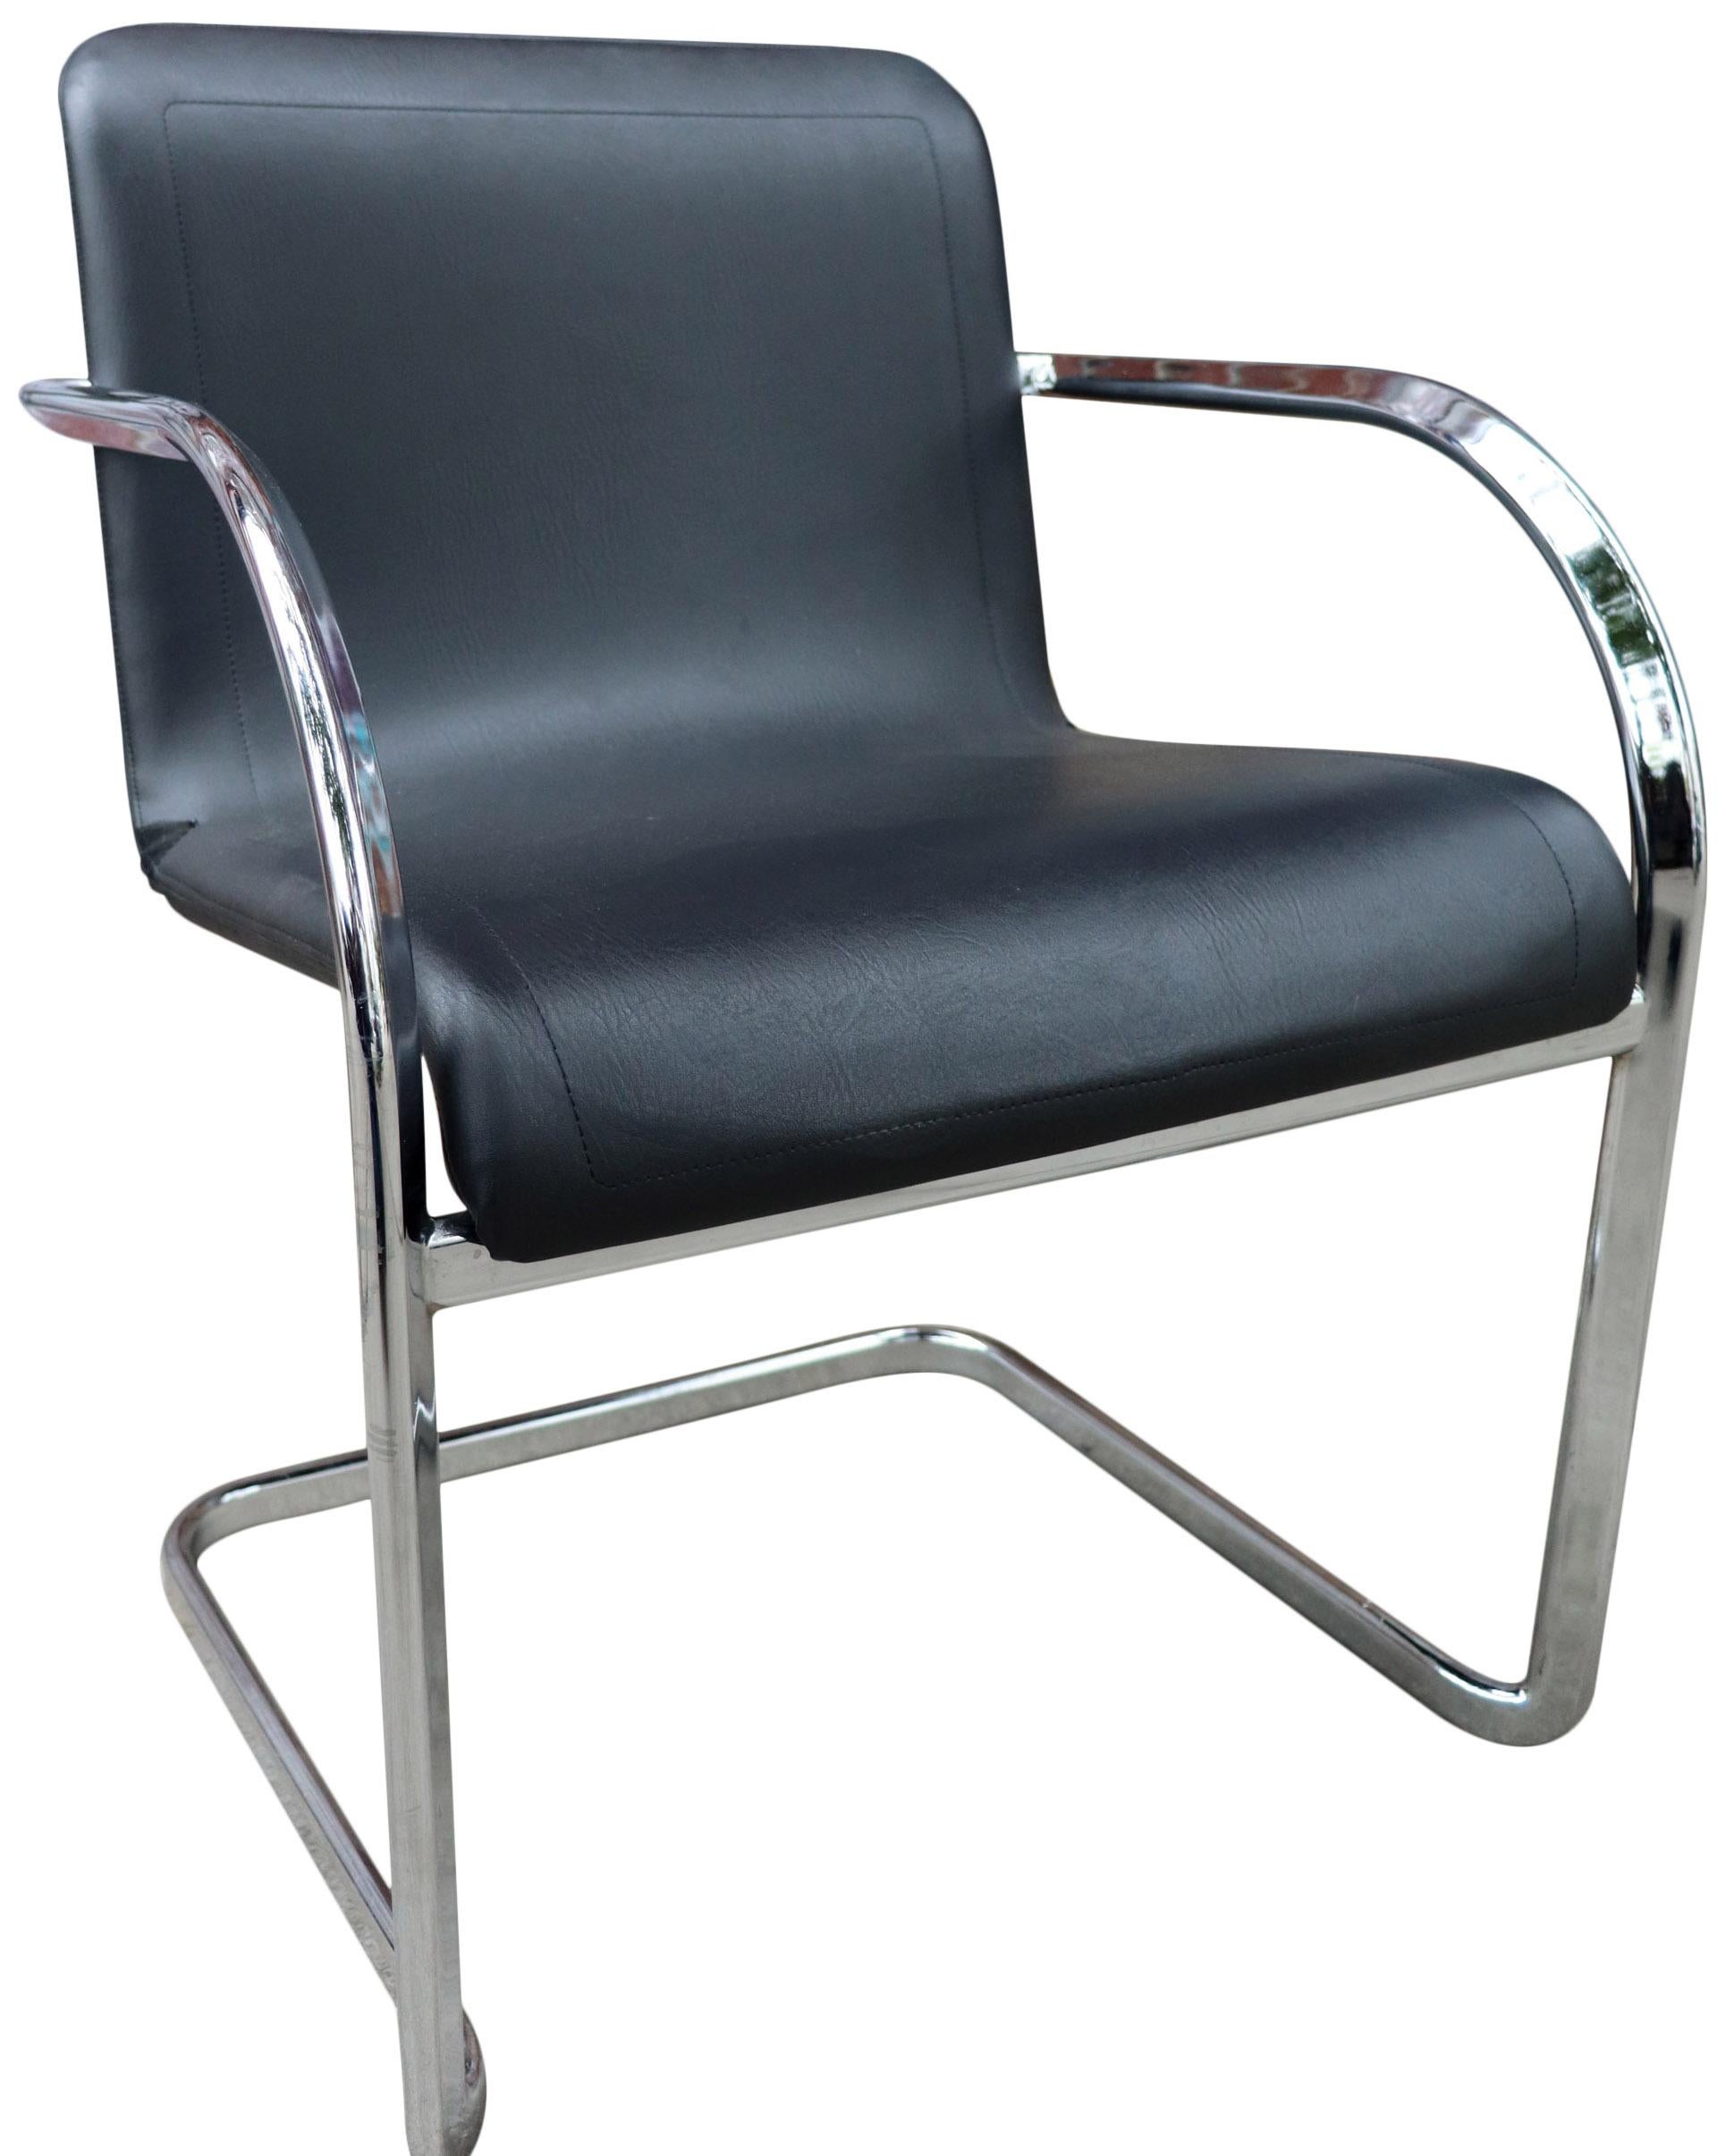 Post-Modern Thonet Cantilever Lounge Chairs in Chrome by Anton Lorenz